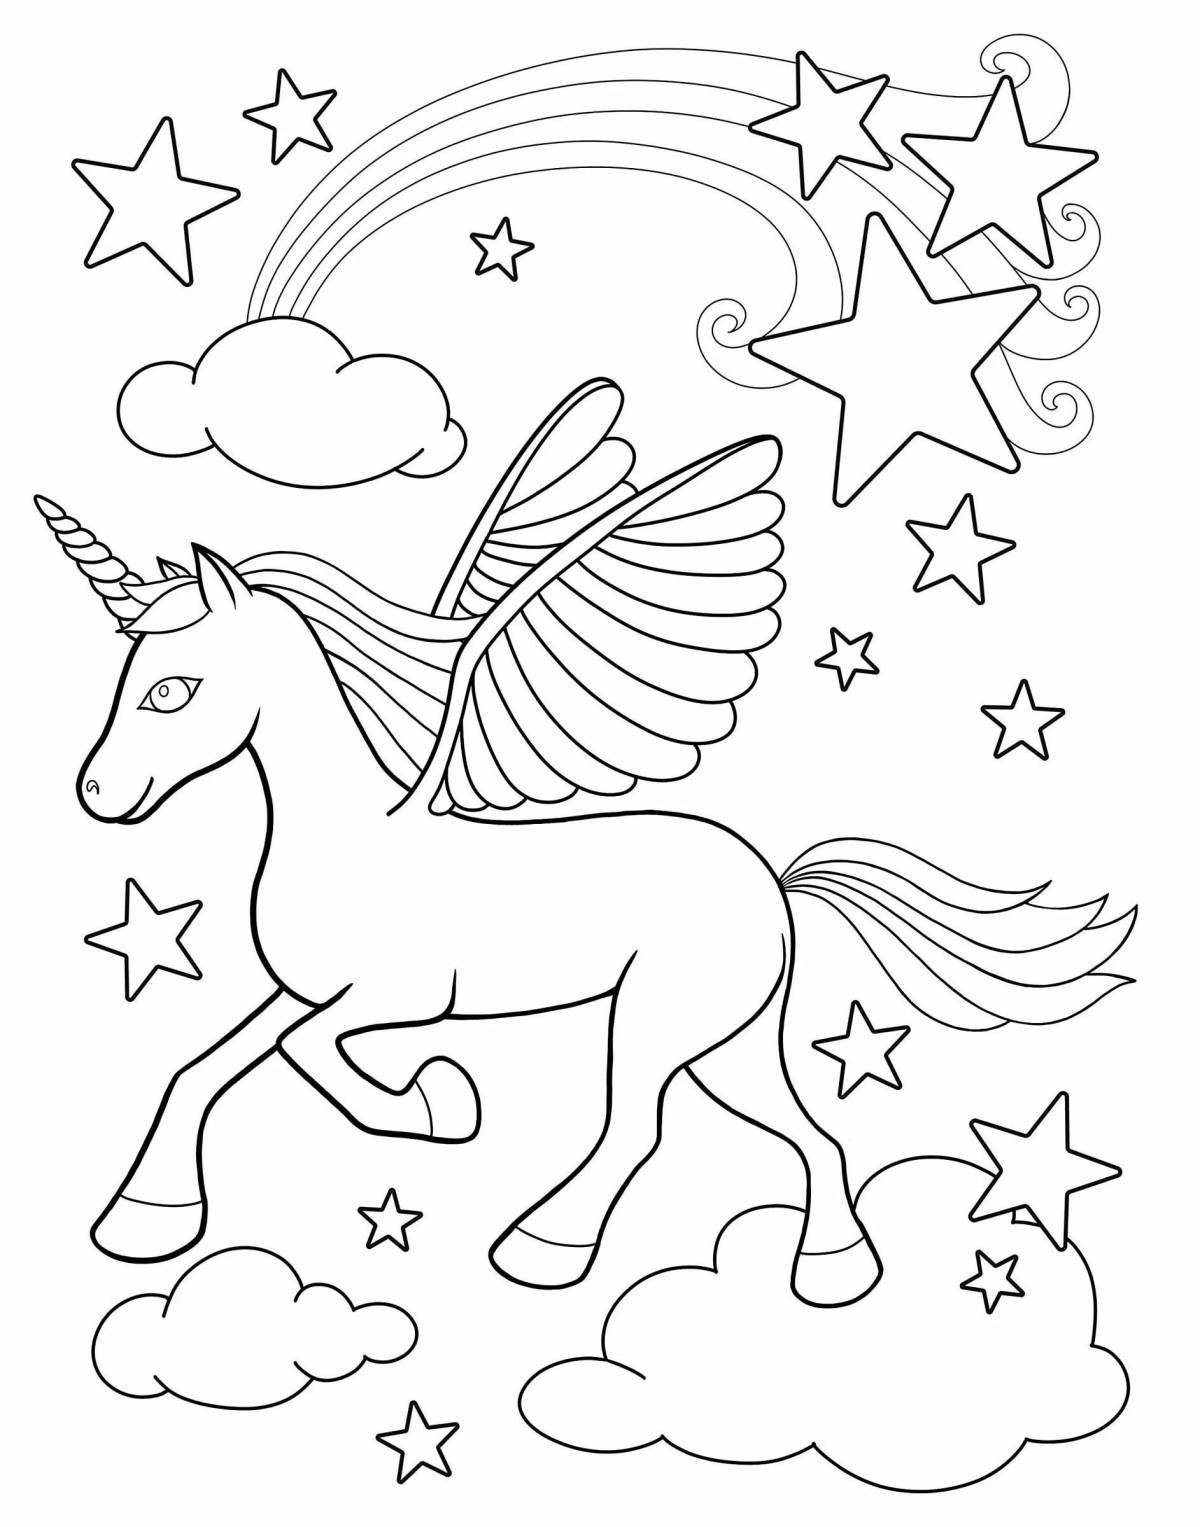 Majestic unicorn coloring for kids 4 5